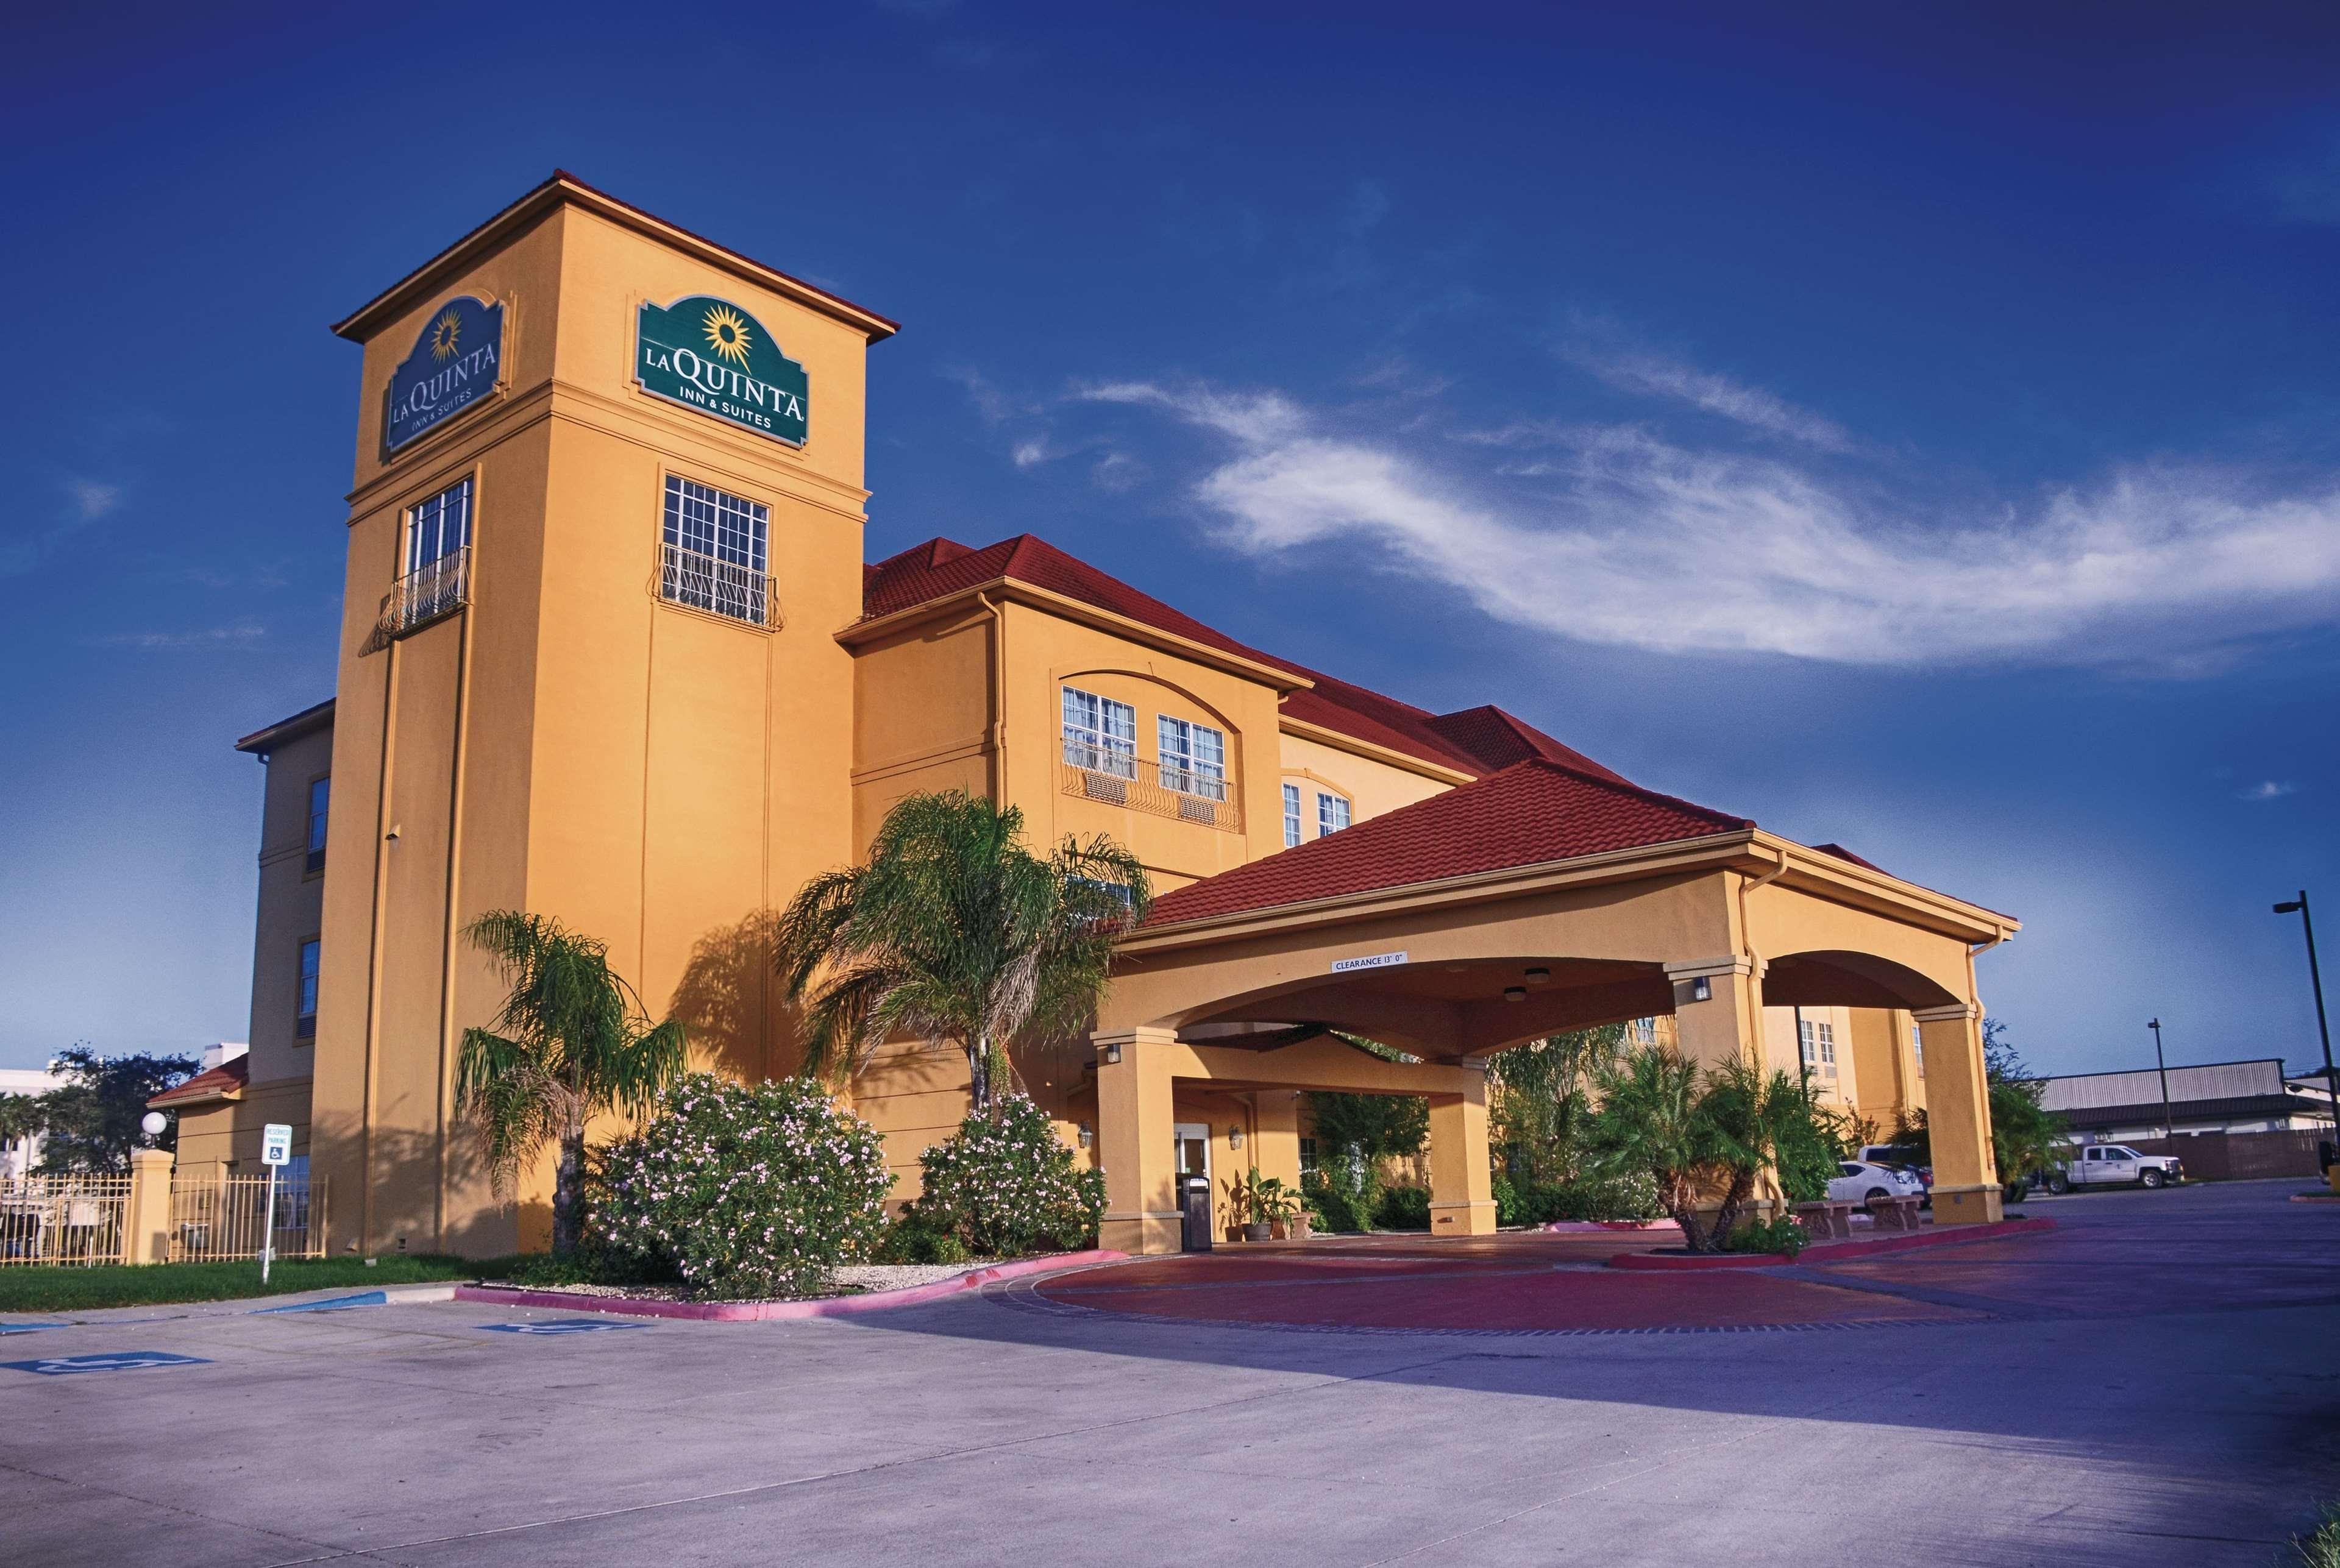 Holiday Inn Express & Suites West Long Branch - Eatontown, West Long Branch  (NJ)